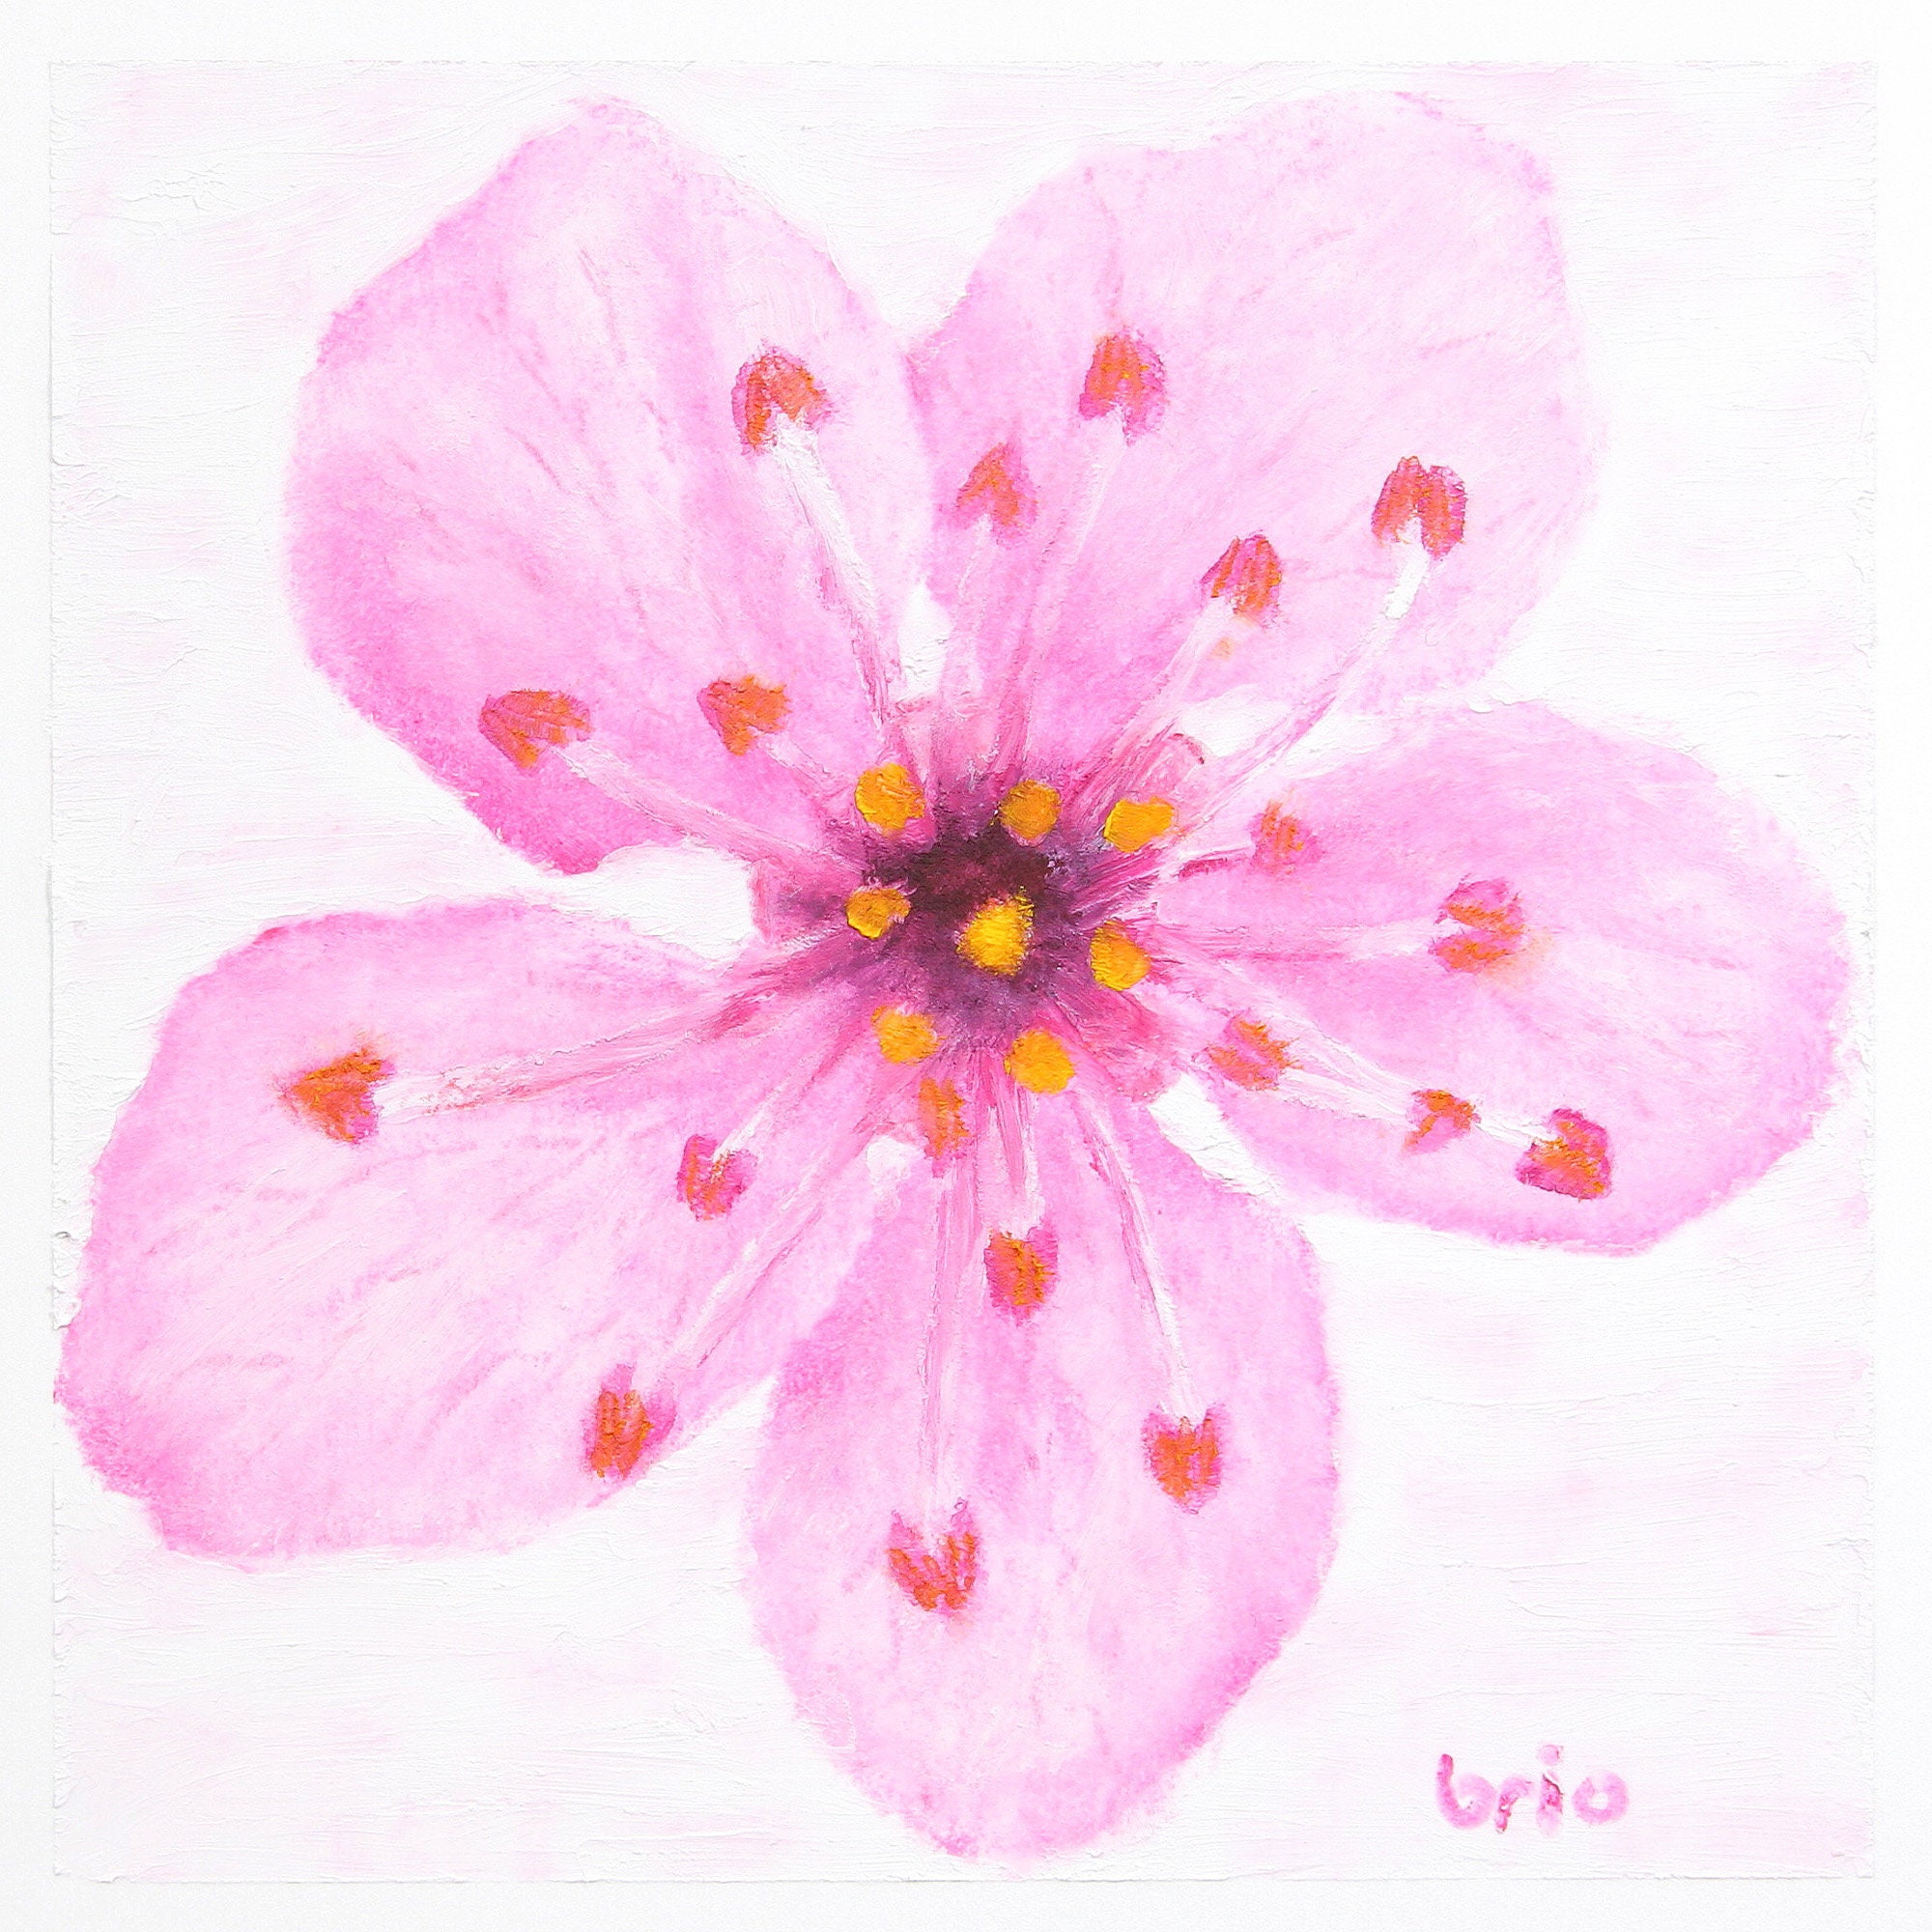 Pink Cherry Blossom Flower Drawing Done With Makeup 